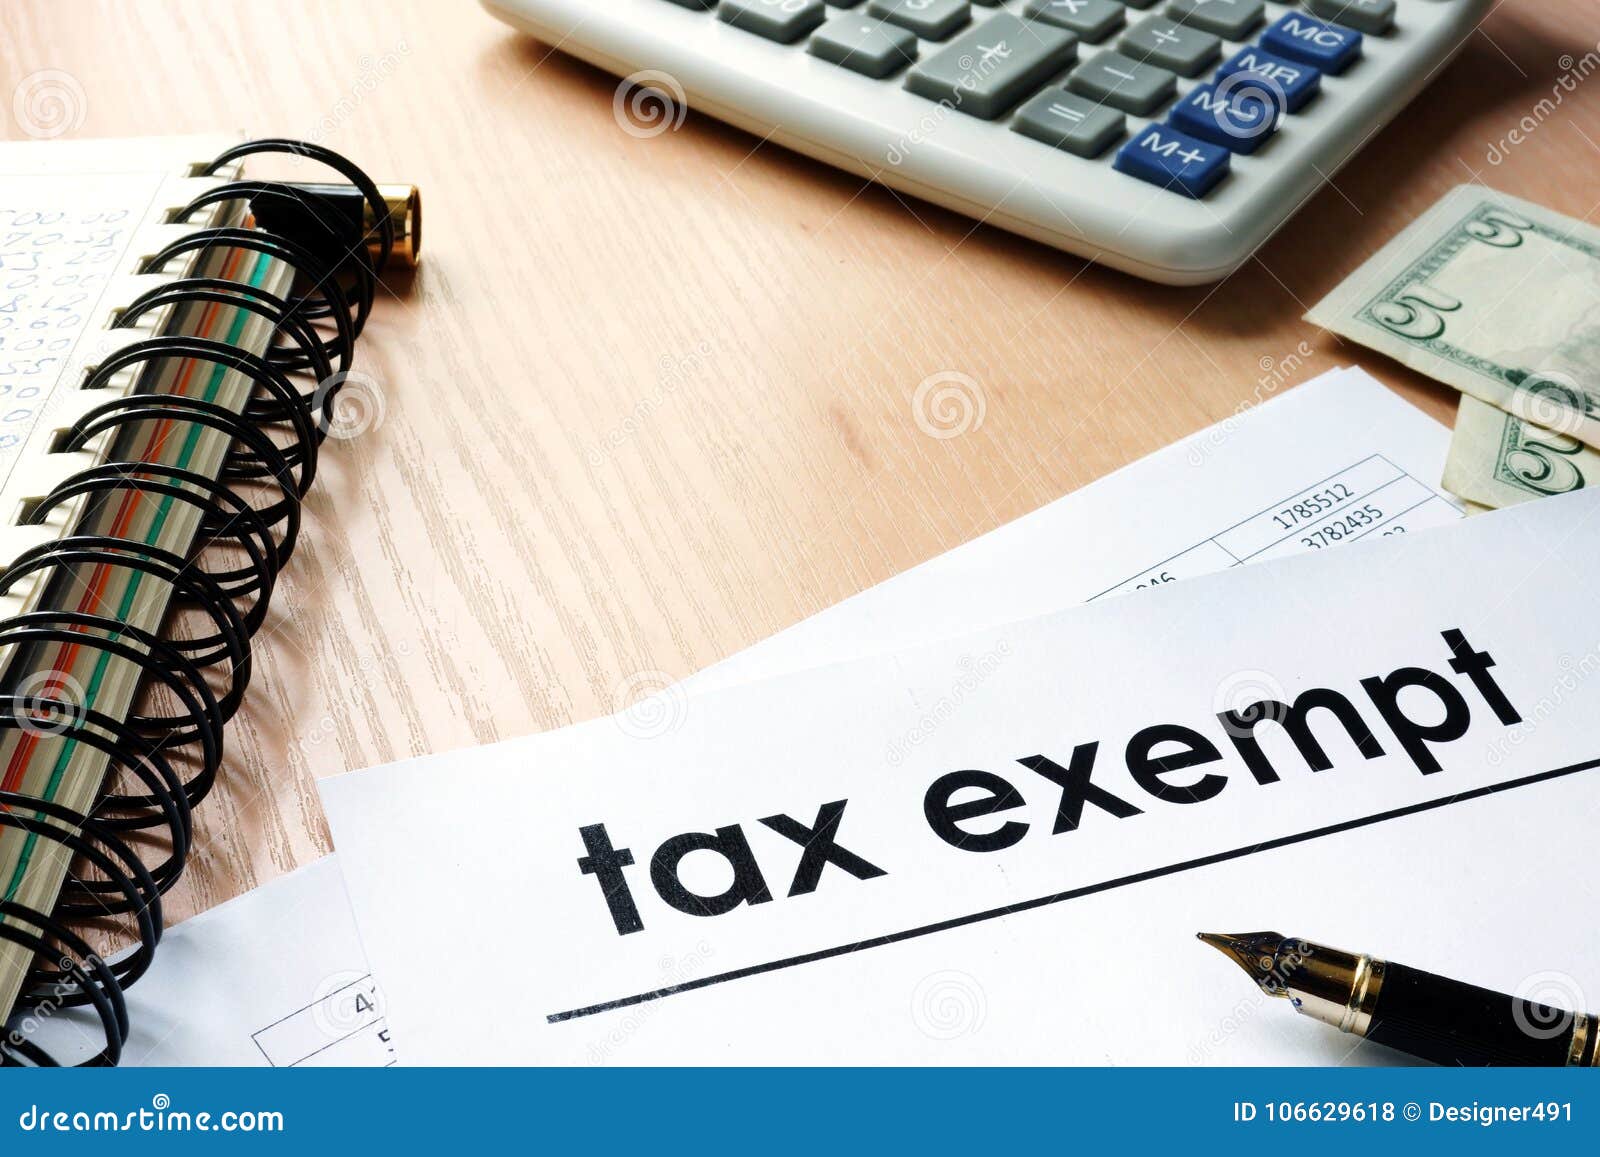 documents with title tax exempt on a table